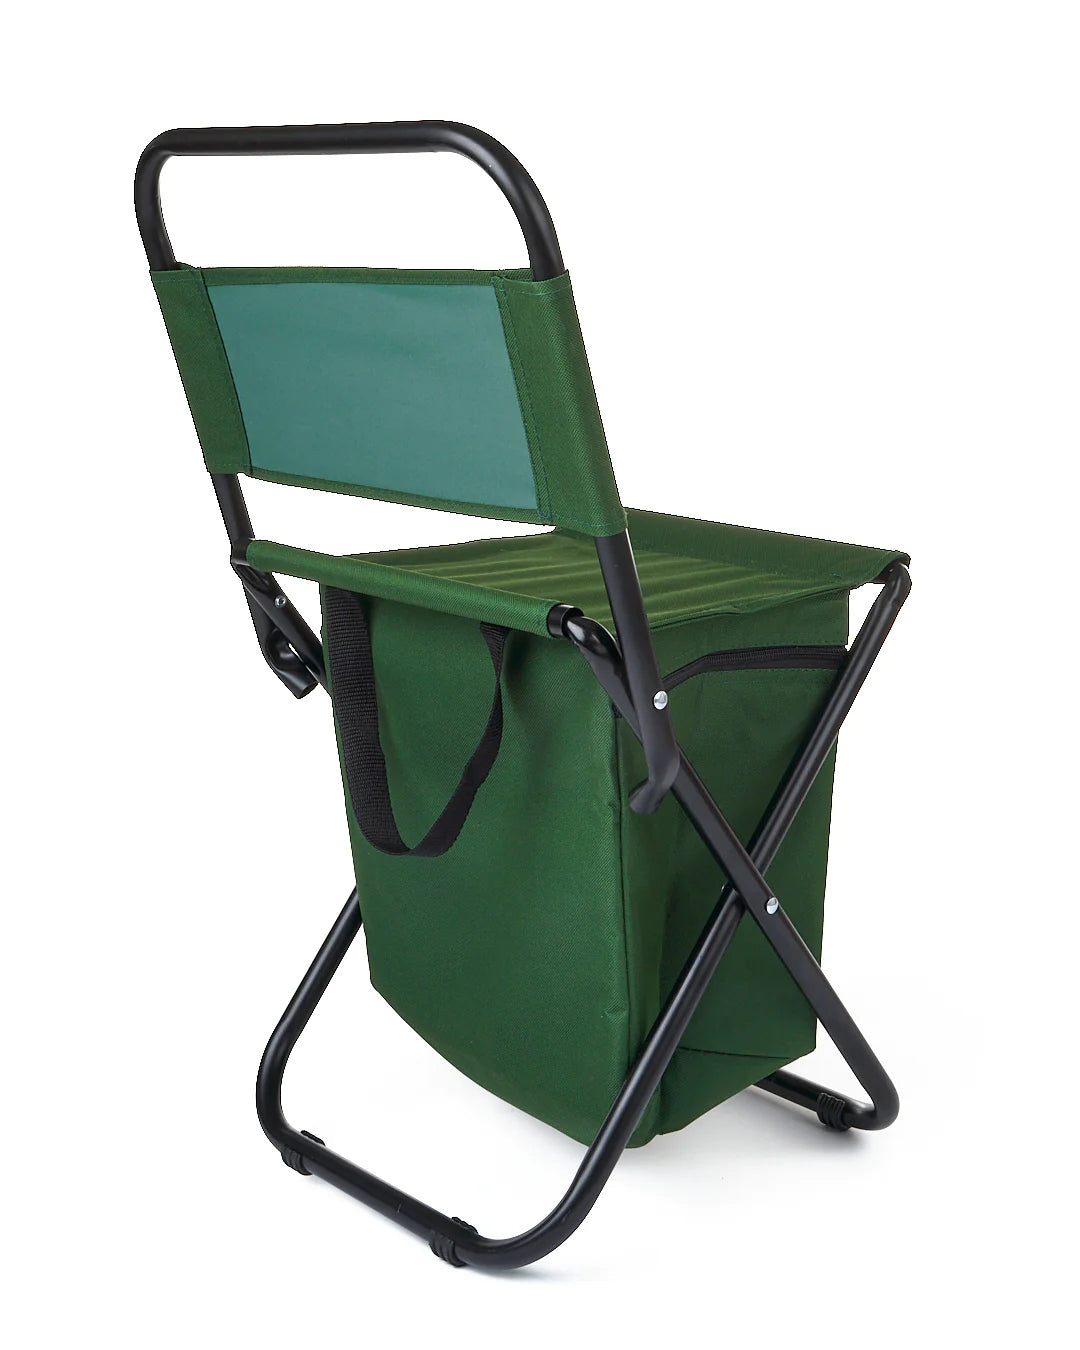 SALTROCK 'SPECTATOR' FOLDABLE CHAIR WITH COOLER BAG